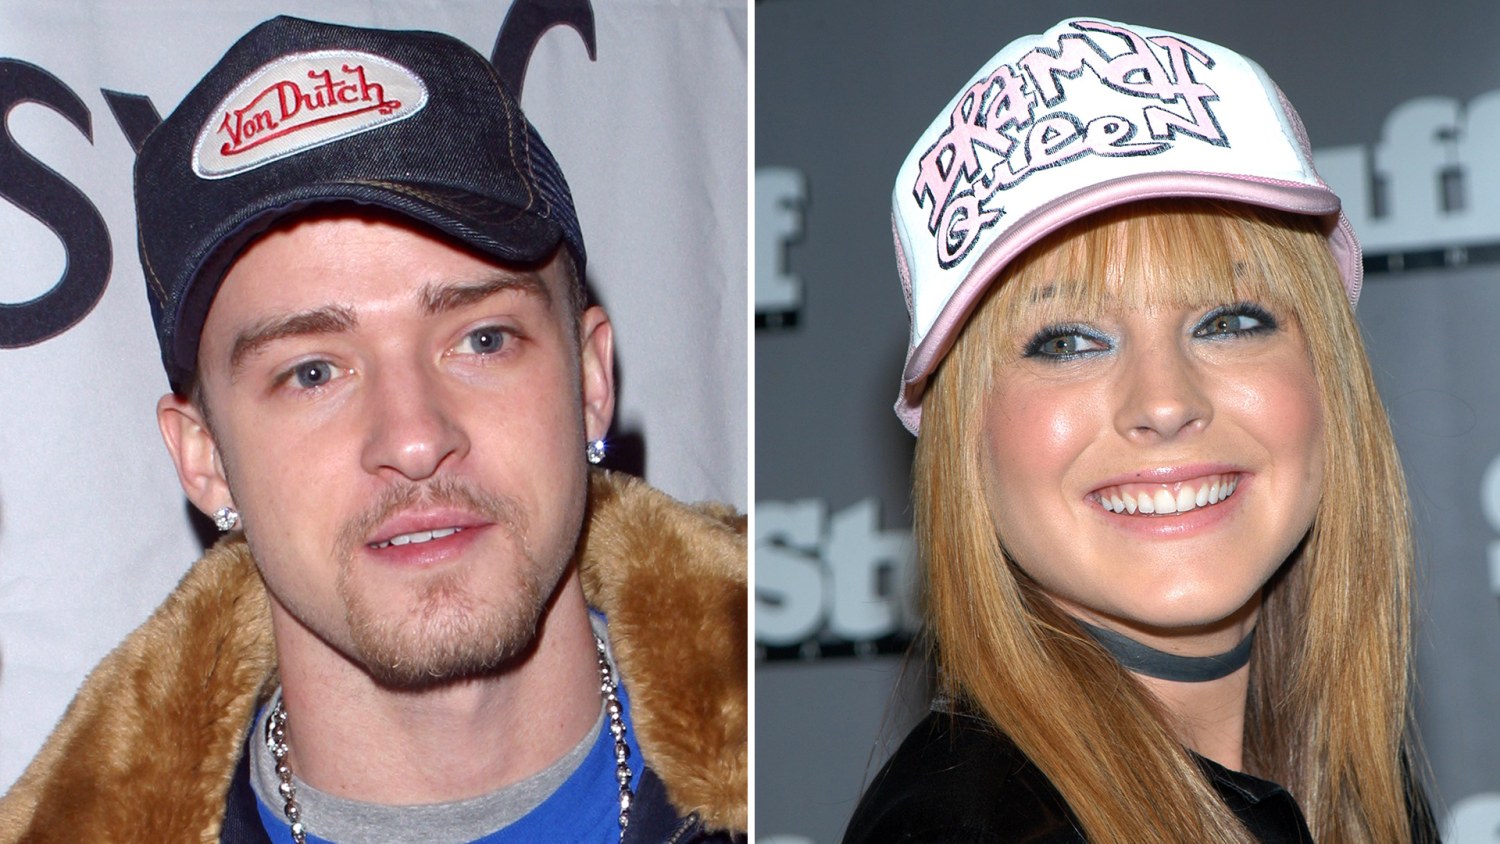 Trucker hats are making a huge comeback, unfortunately